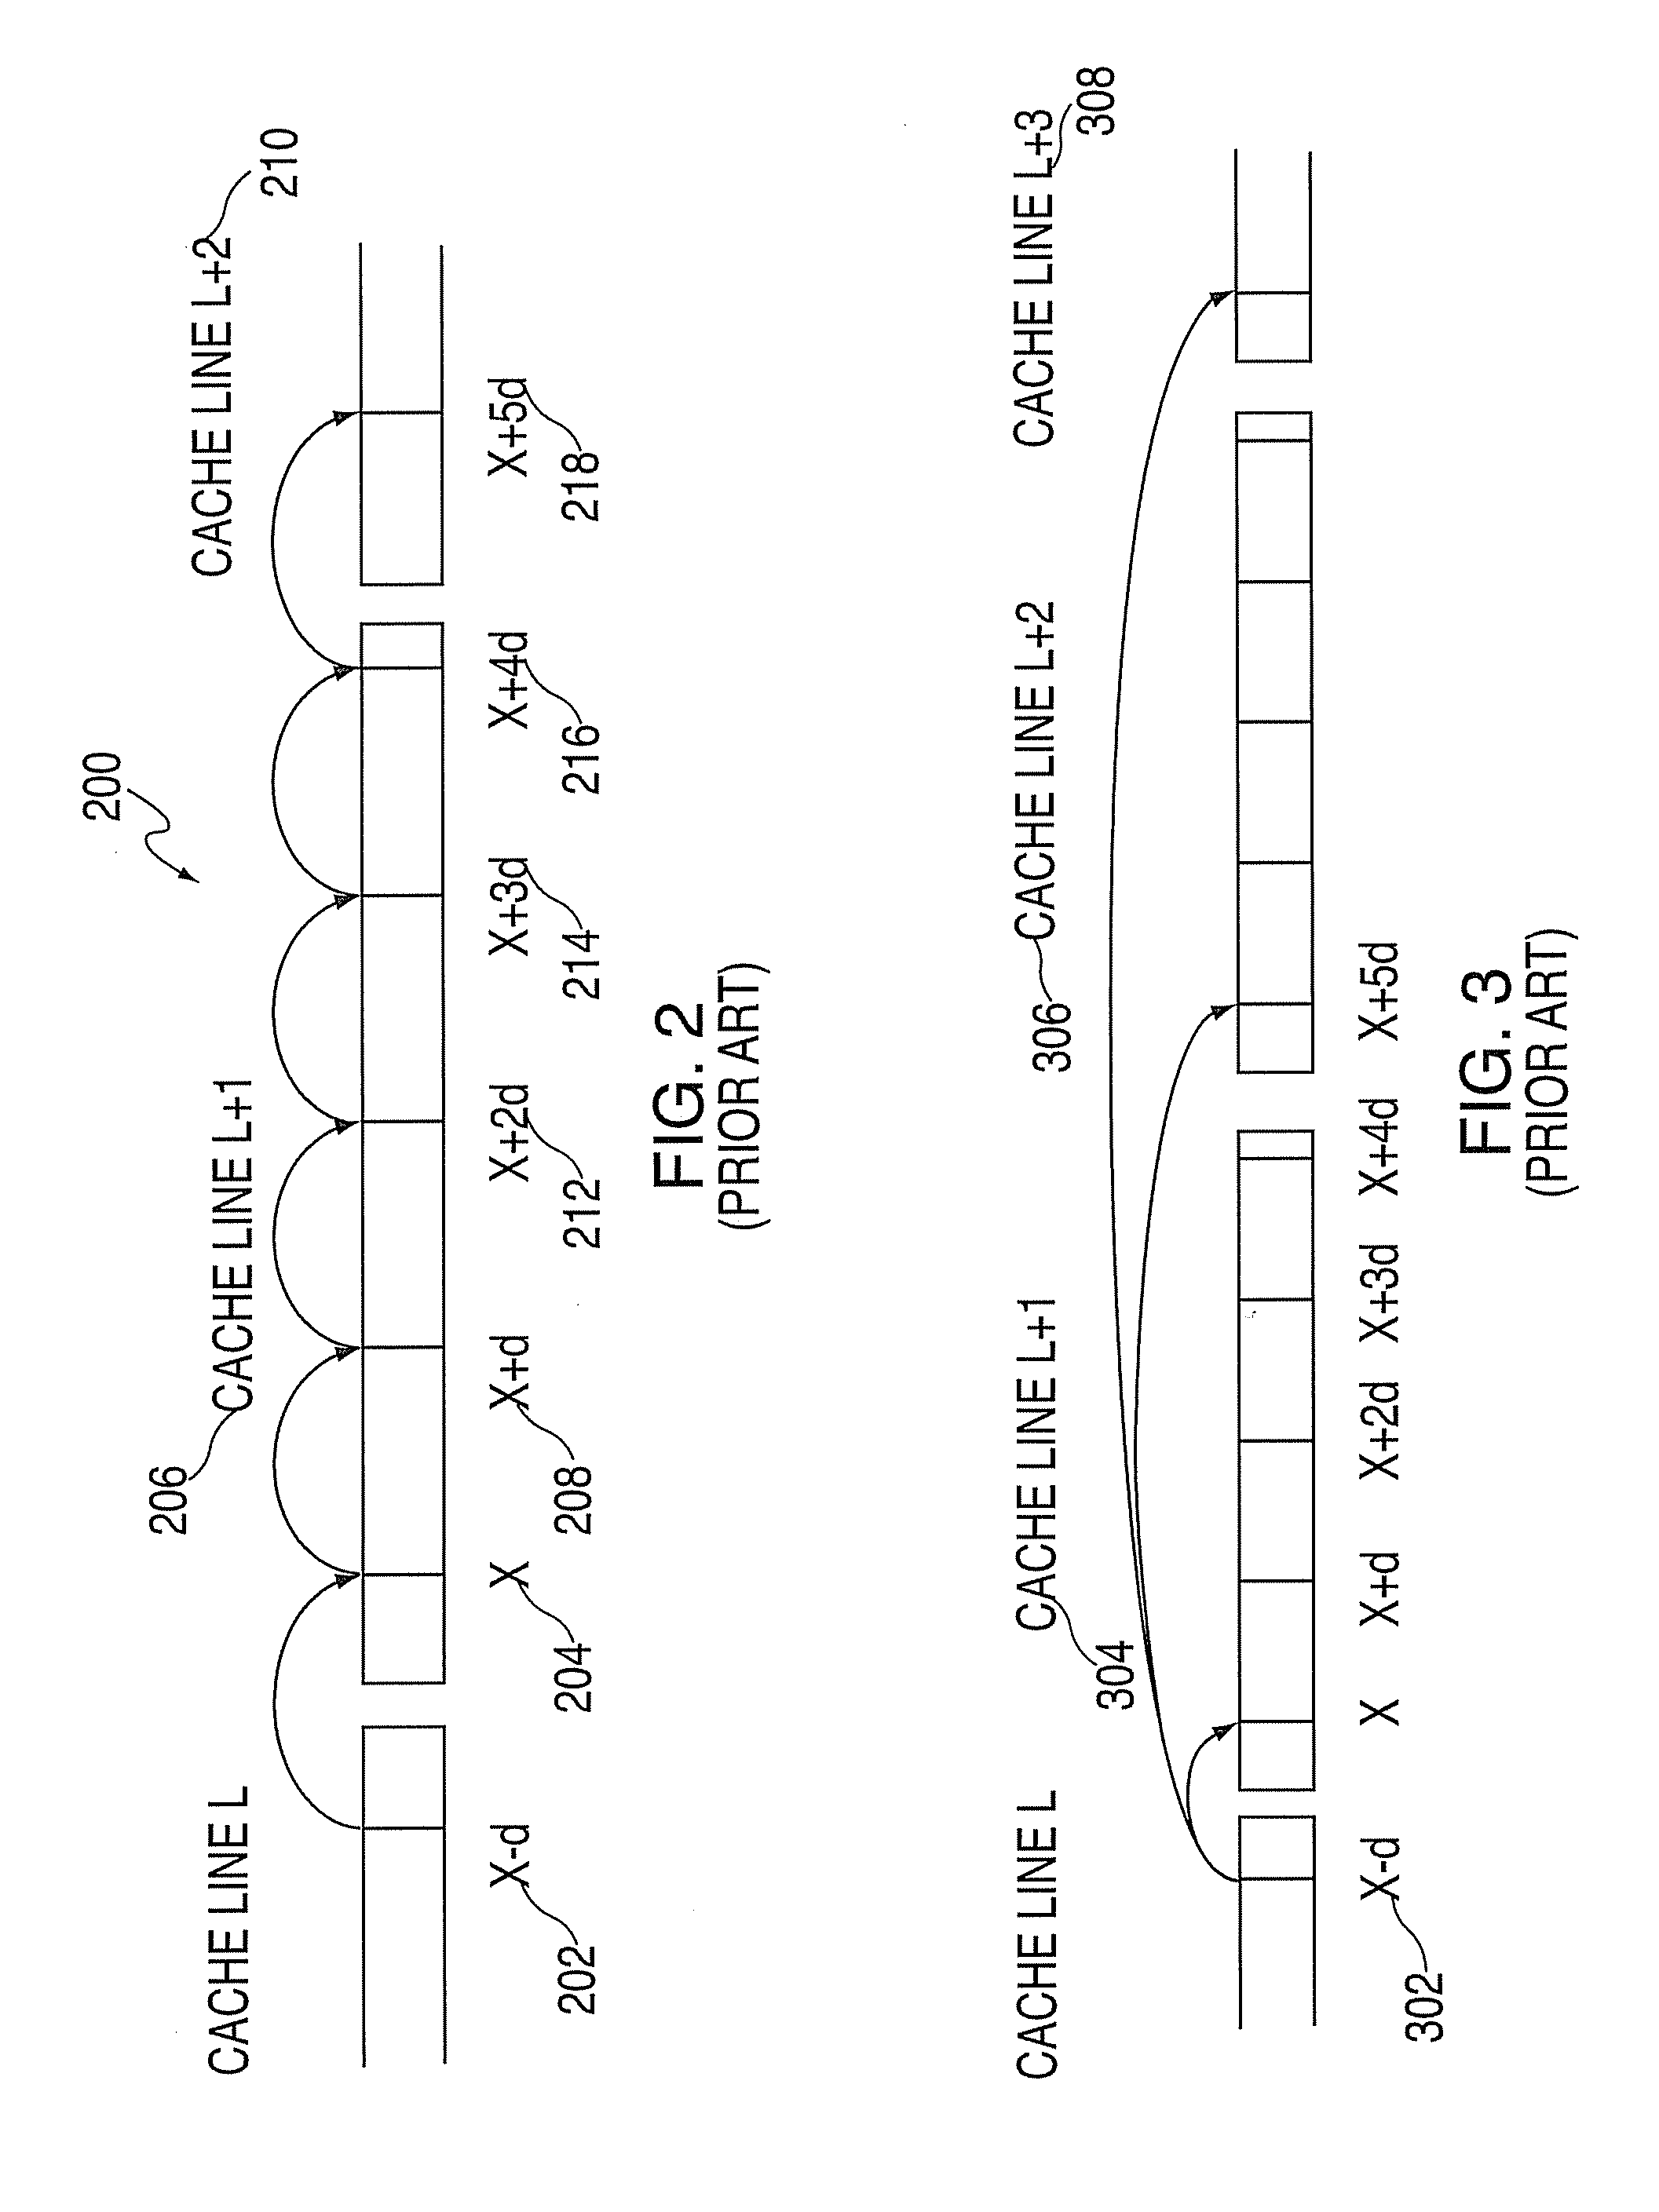 System, method and computer program product for enhancing timeliness of cache prefetching